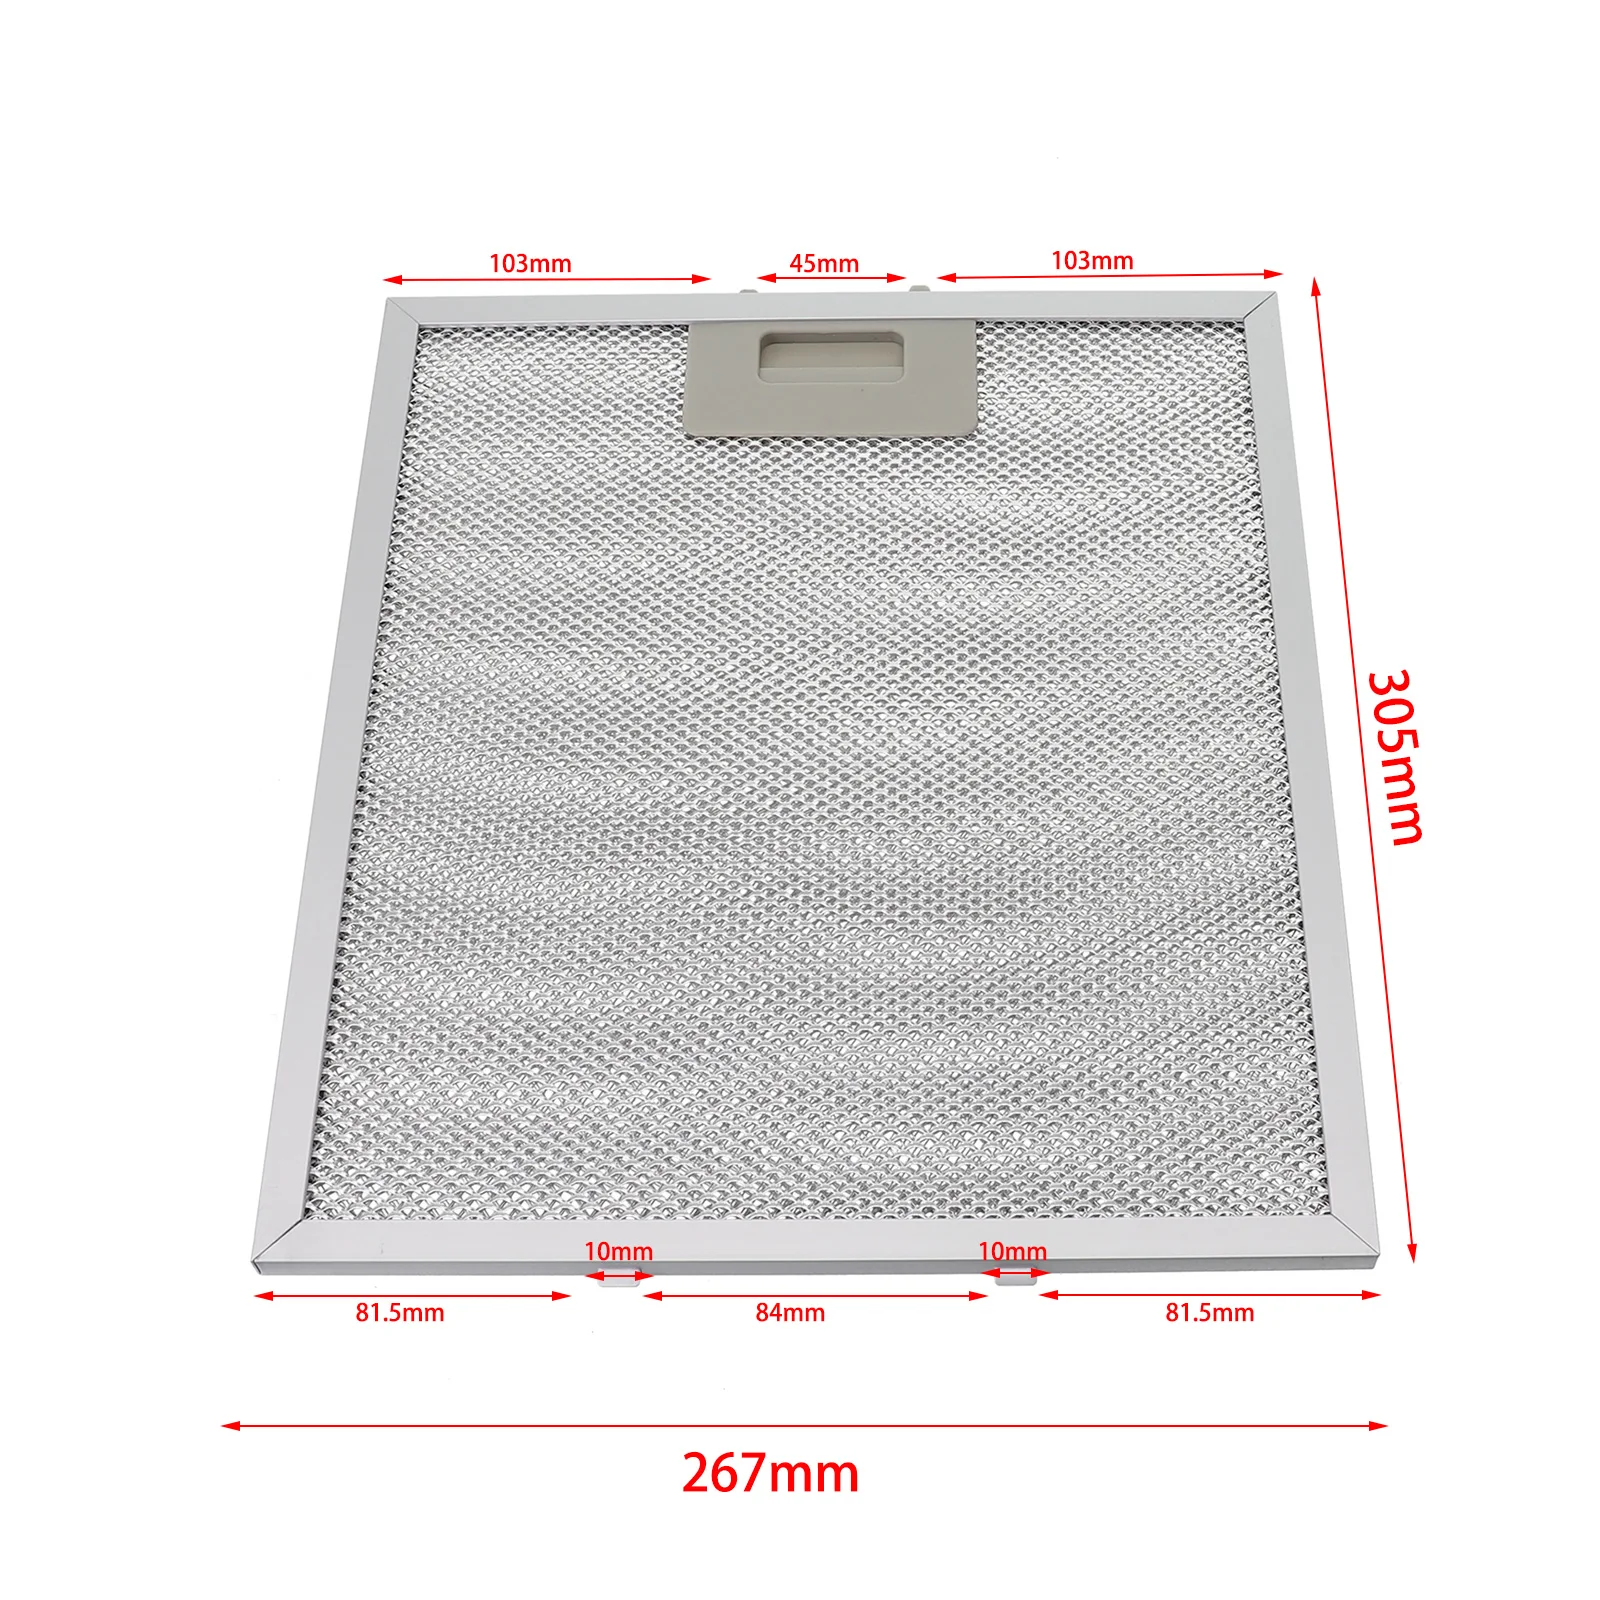 

Stainless Steel Mesh Filter Silver Cooker Hood Filters 305 x 267 x 9mm Improved Air Quality Reduce Cooking Odors